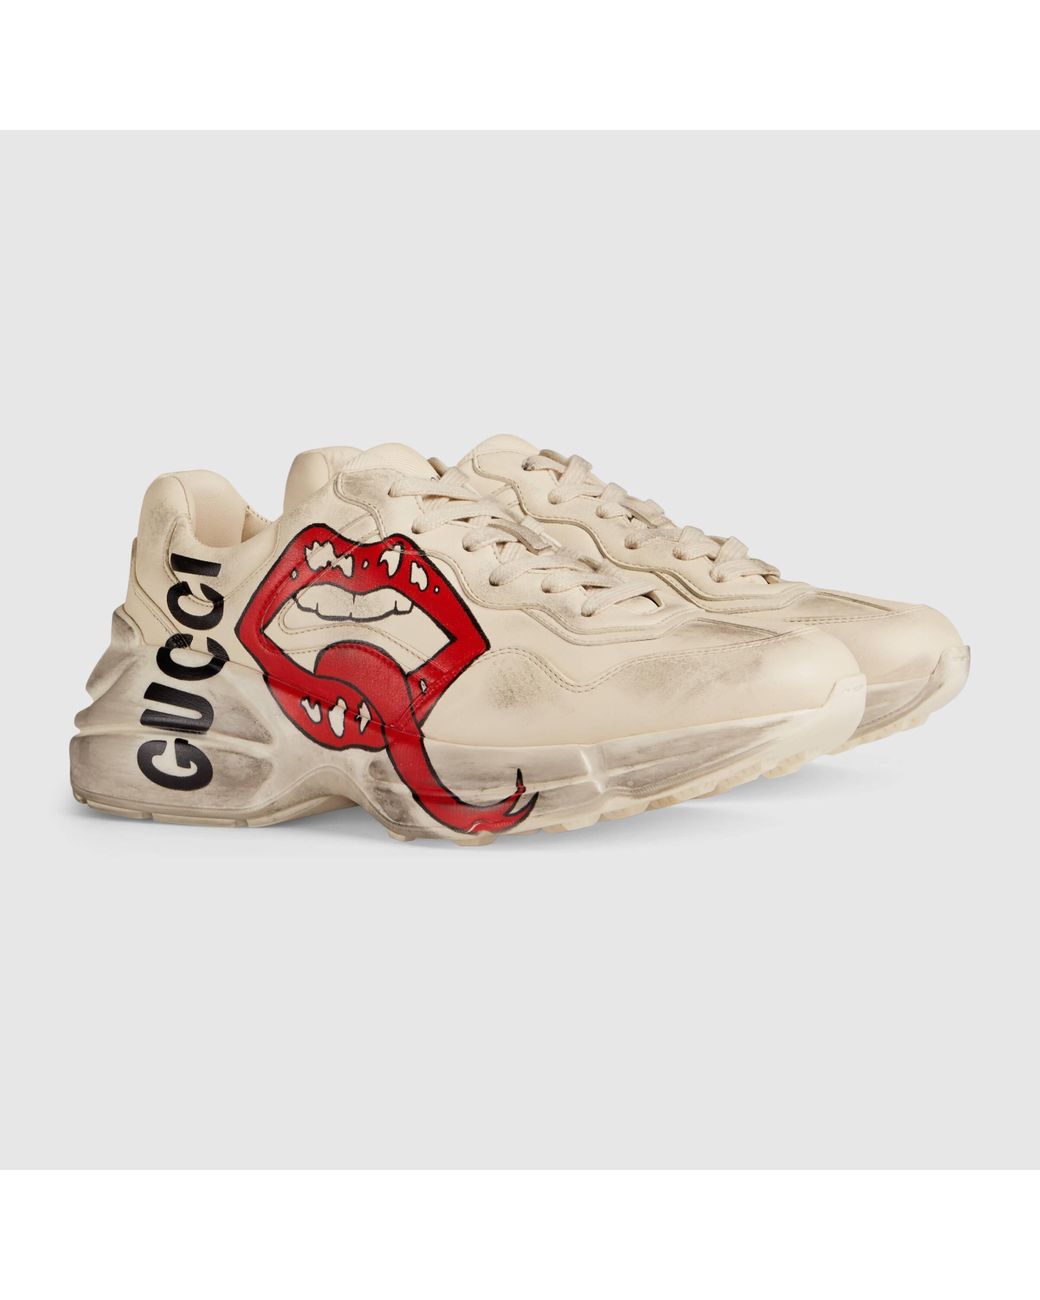 Vertrouwen op dans uitstulping Gucci Rhyton Leather Sneakers With Maxi Mouth Print in White | Lyst